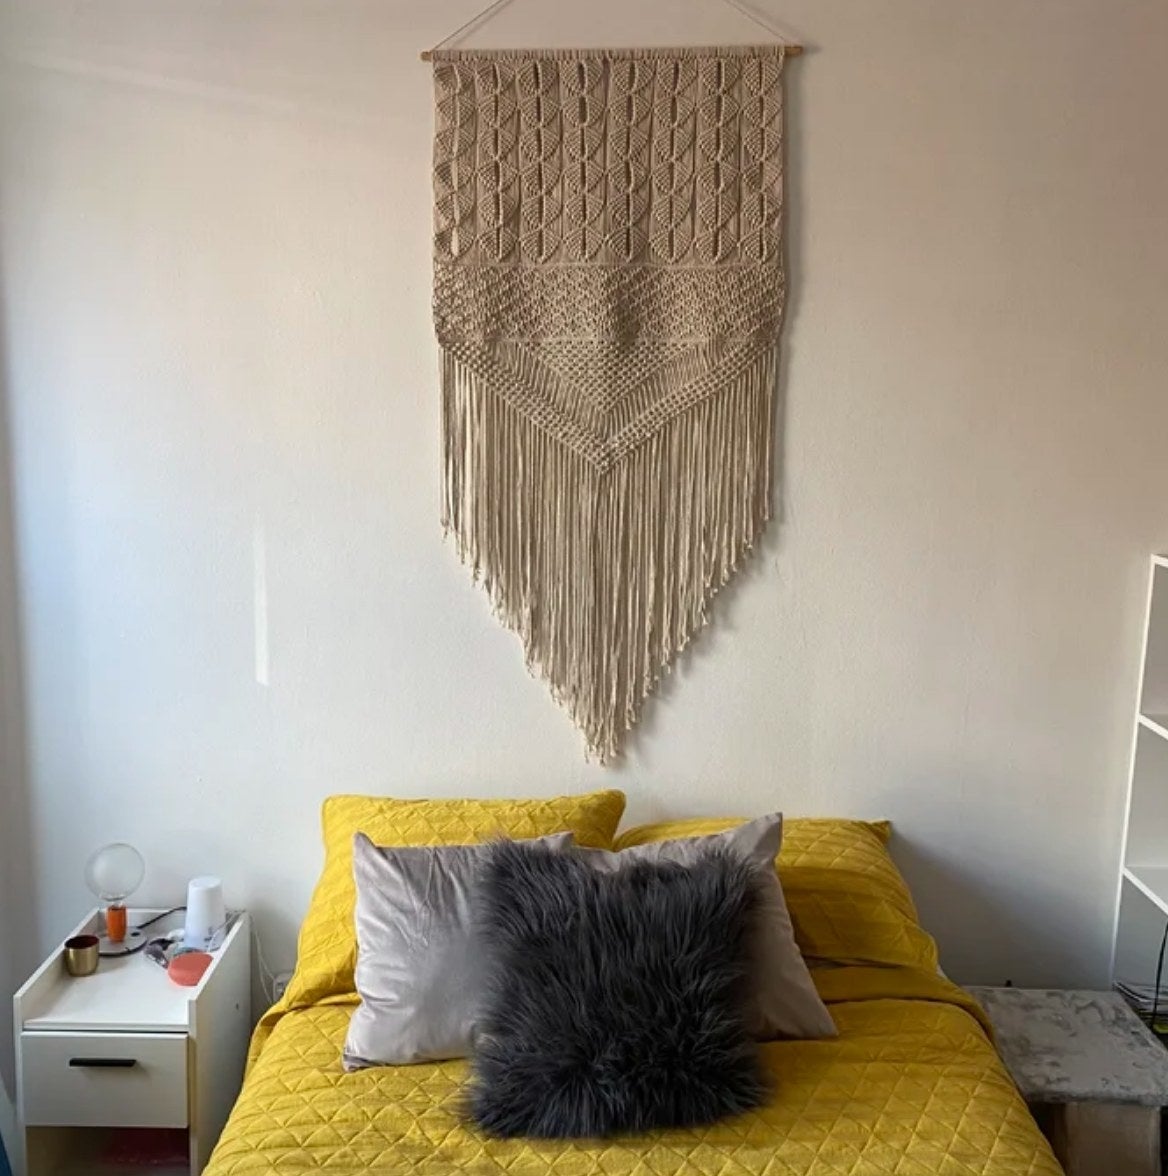 Macrame wall tapestry hanging over yellow bed